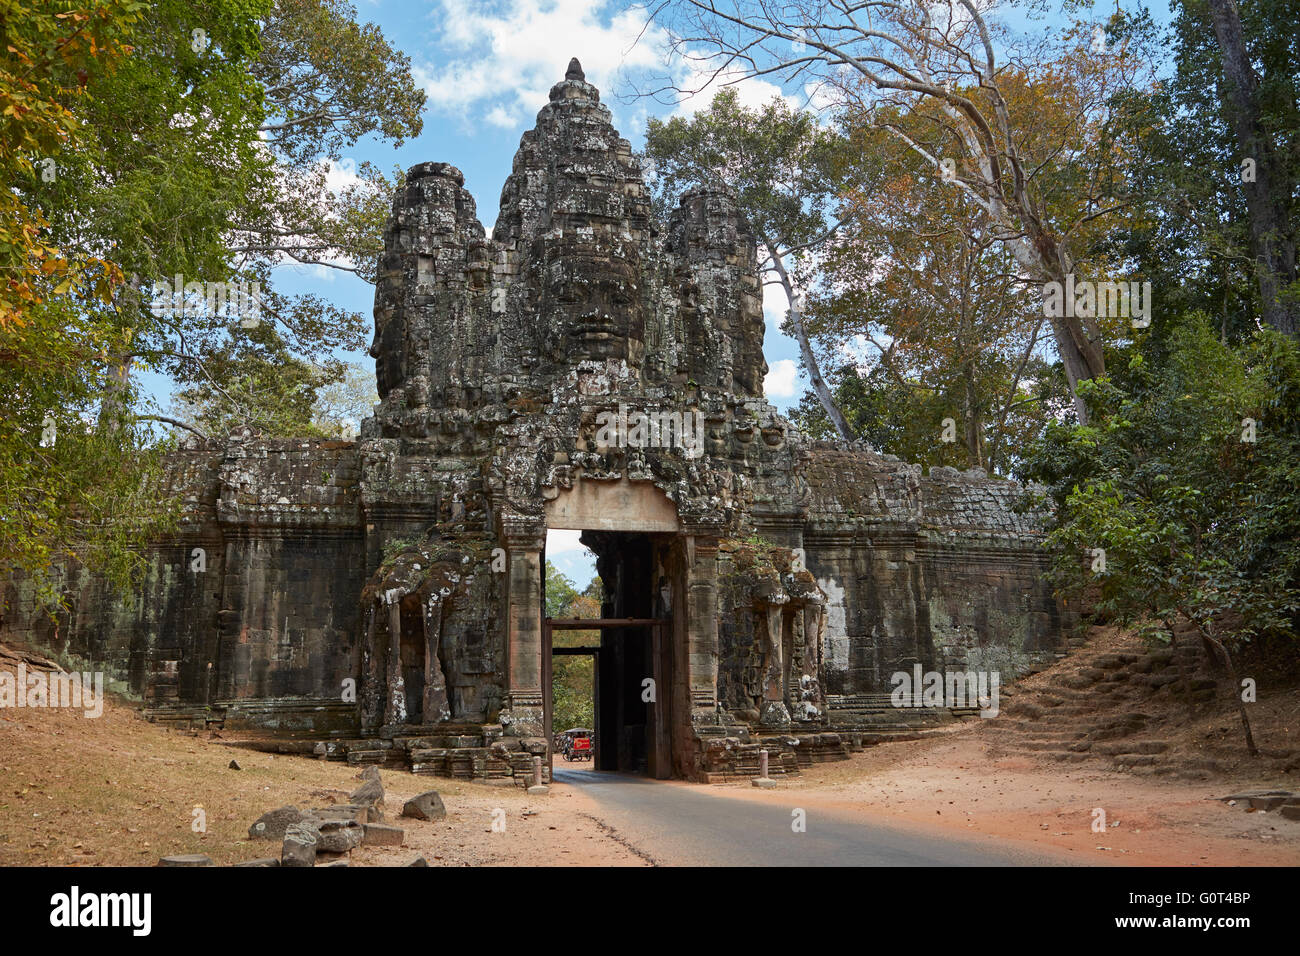 Victory Gate, Angkor Thom (12th century temple complex), Angkor World Heritage Site, Siem Reap, Cambodia Stock Photo